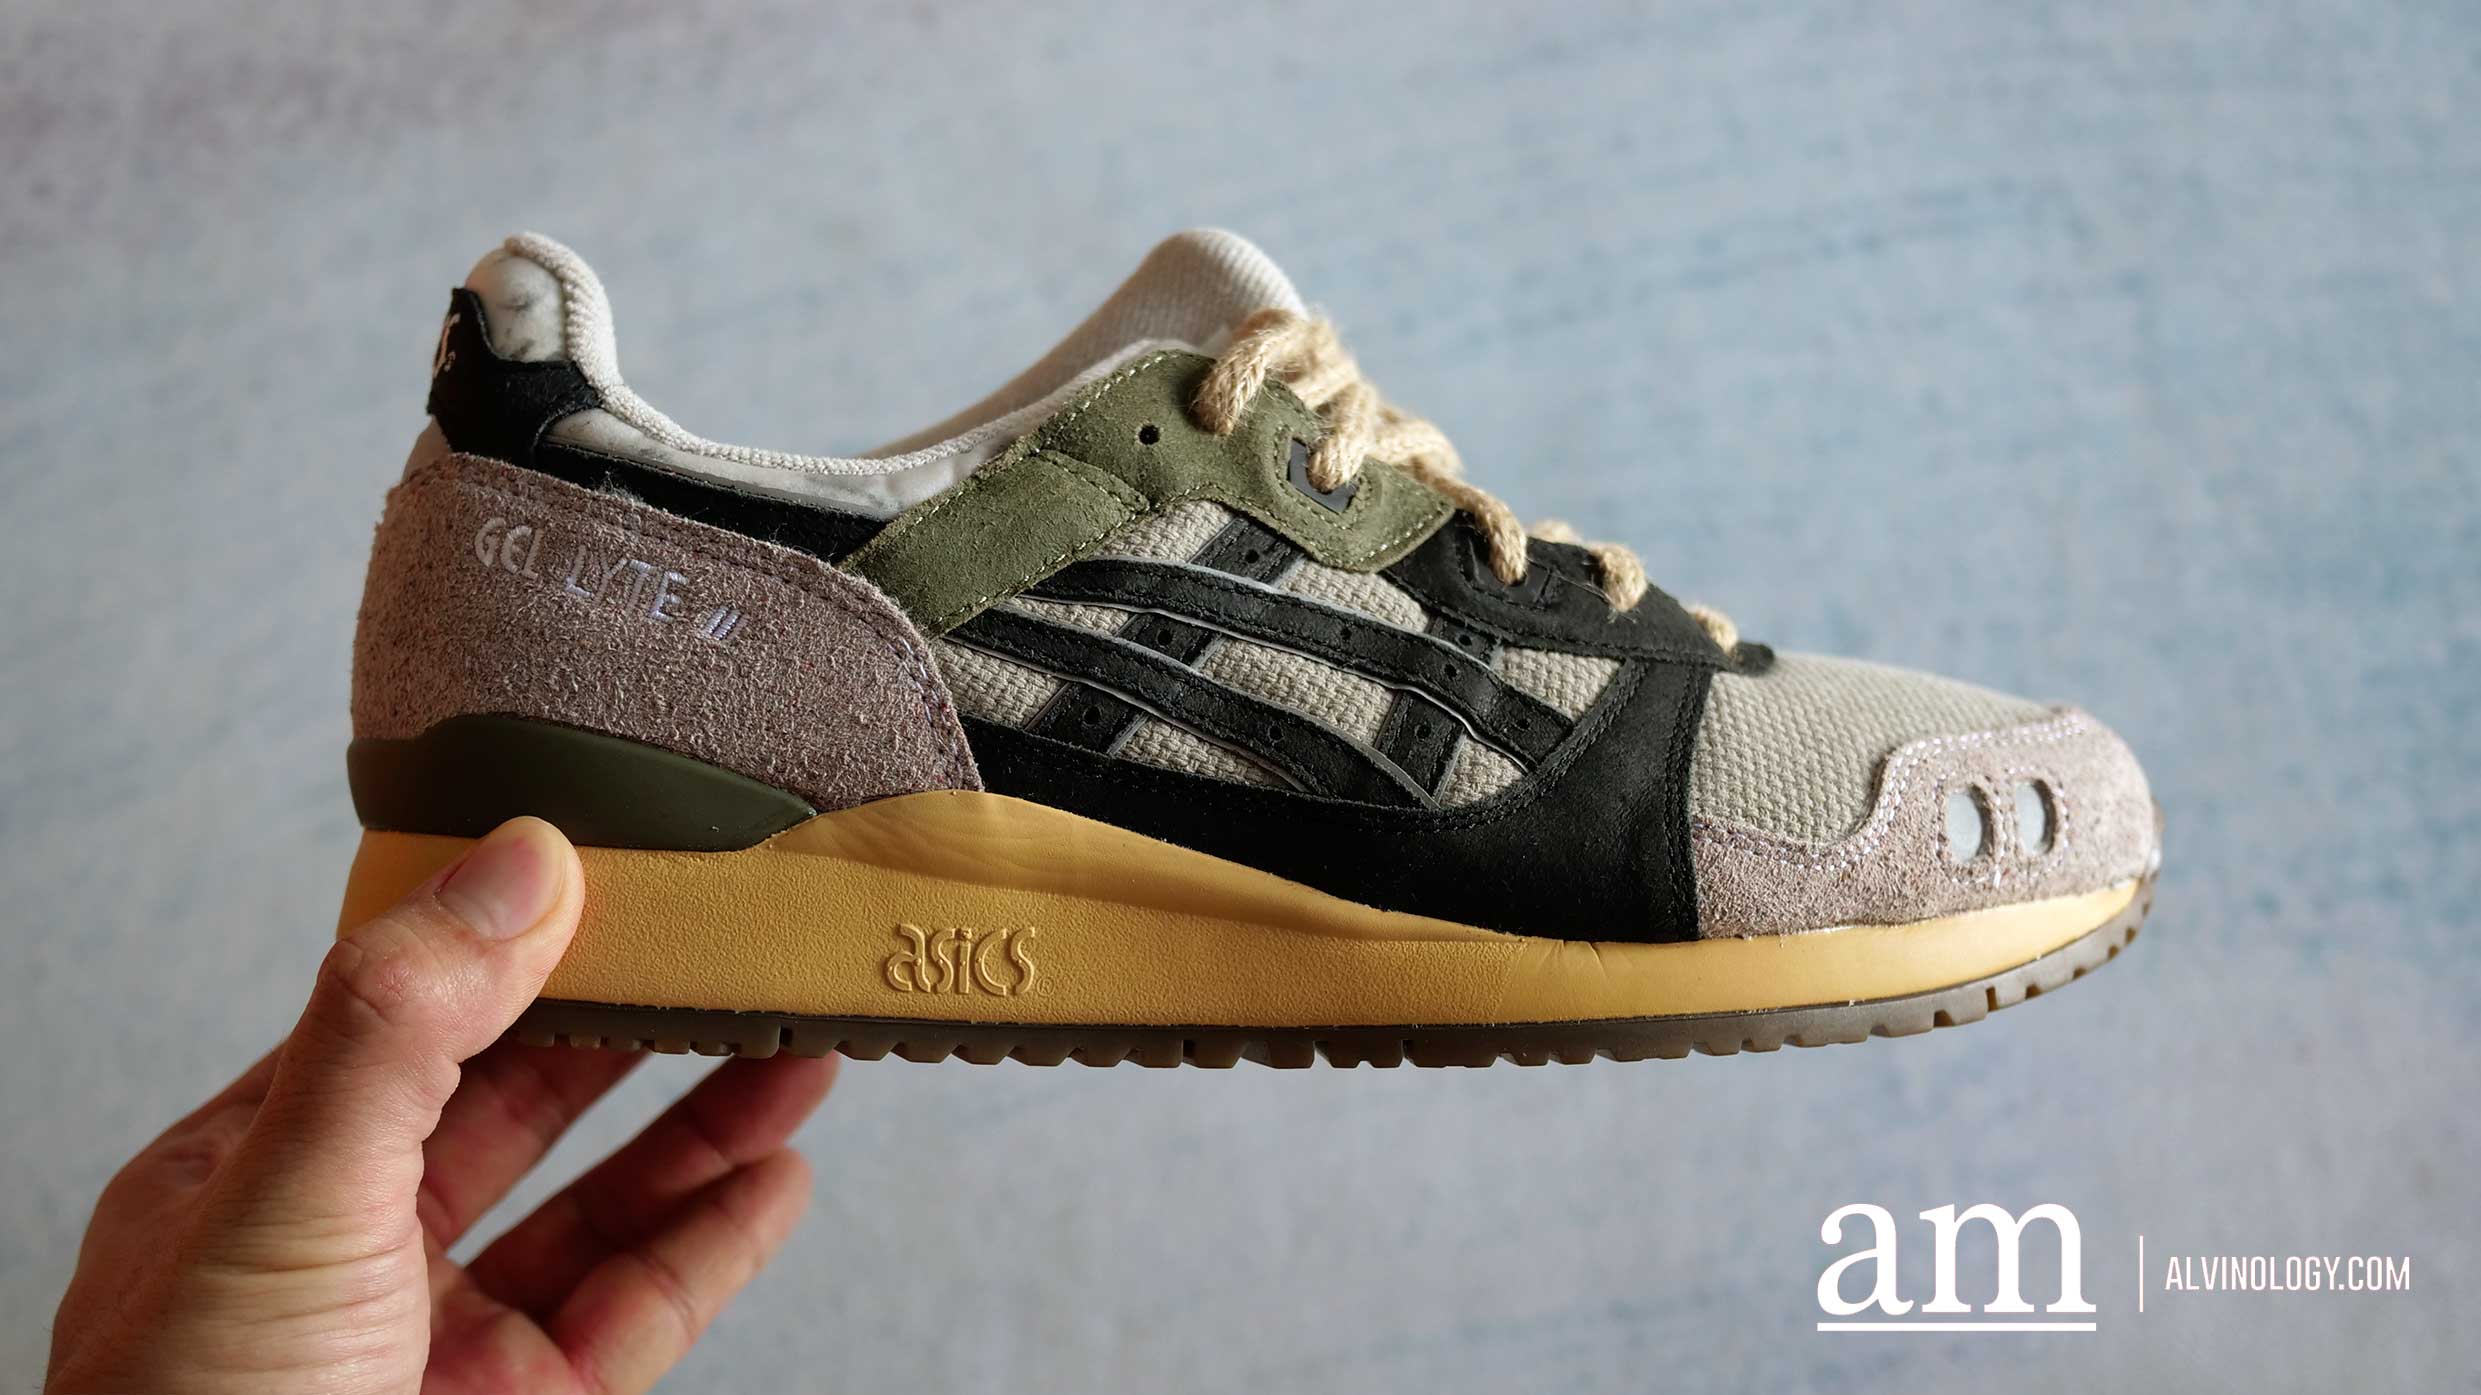 Review] ASICS Sportsyle's Iconic Gel-Lyte III OG gets an eco-friendly rework - are two